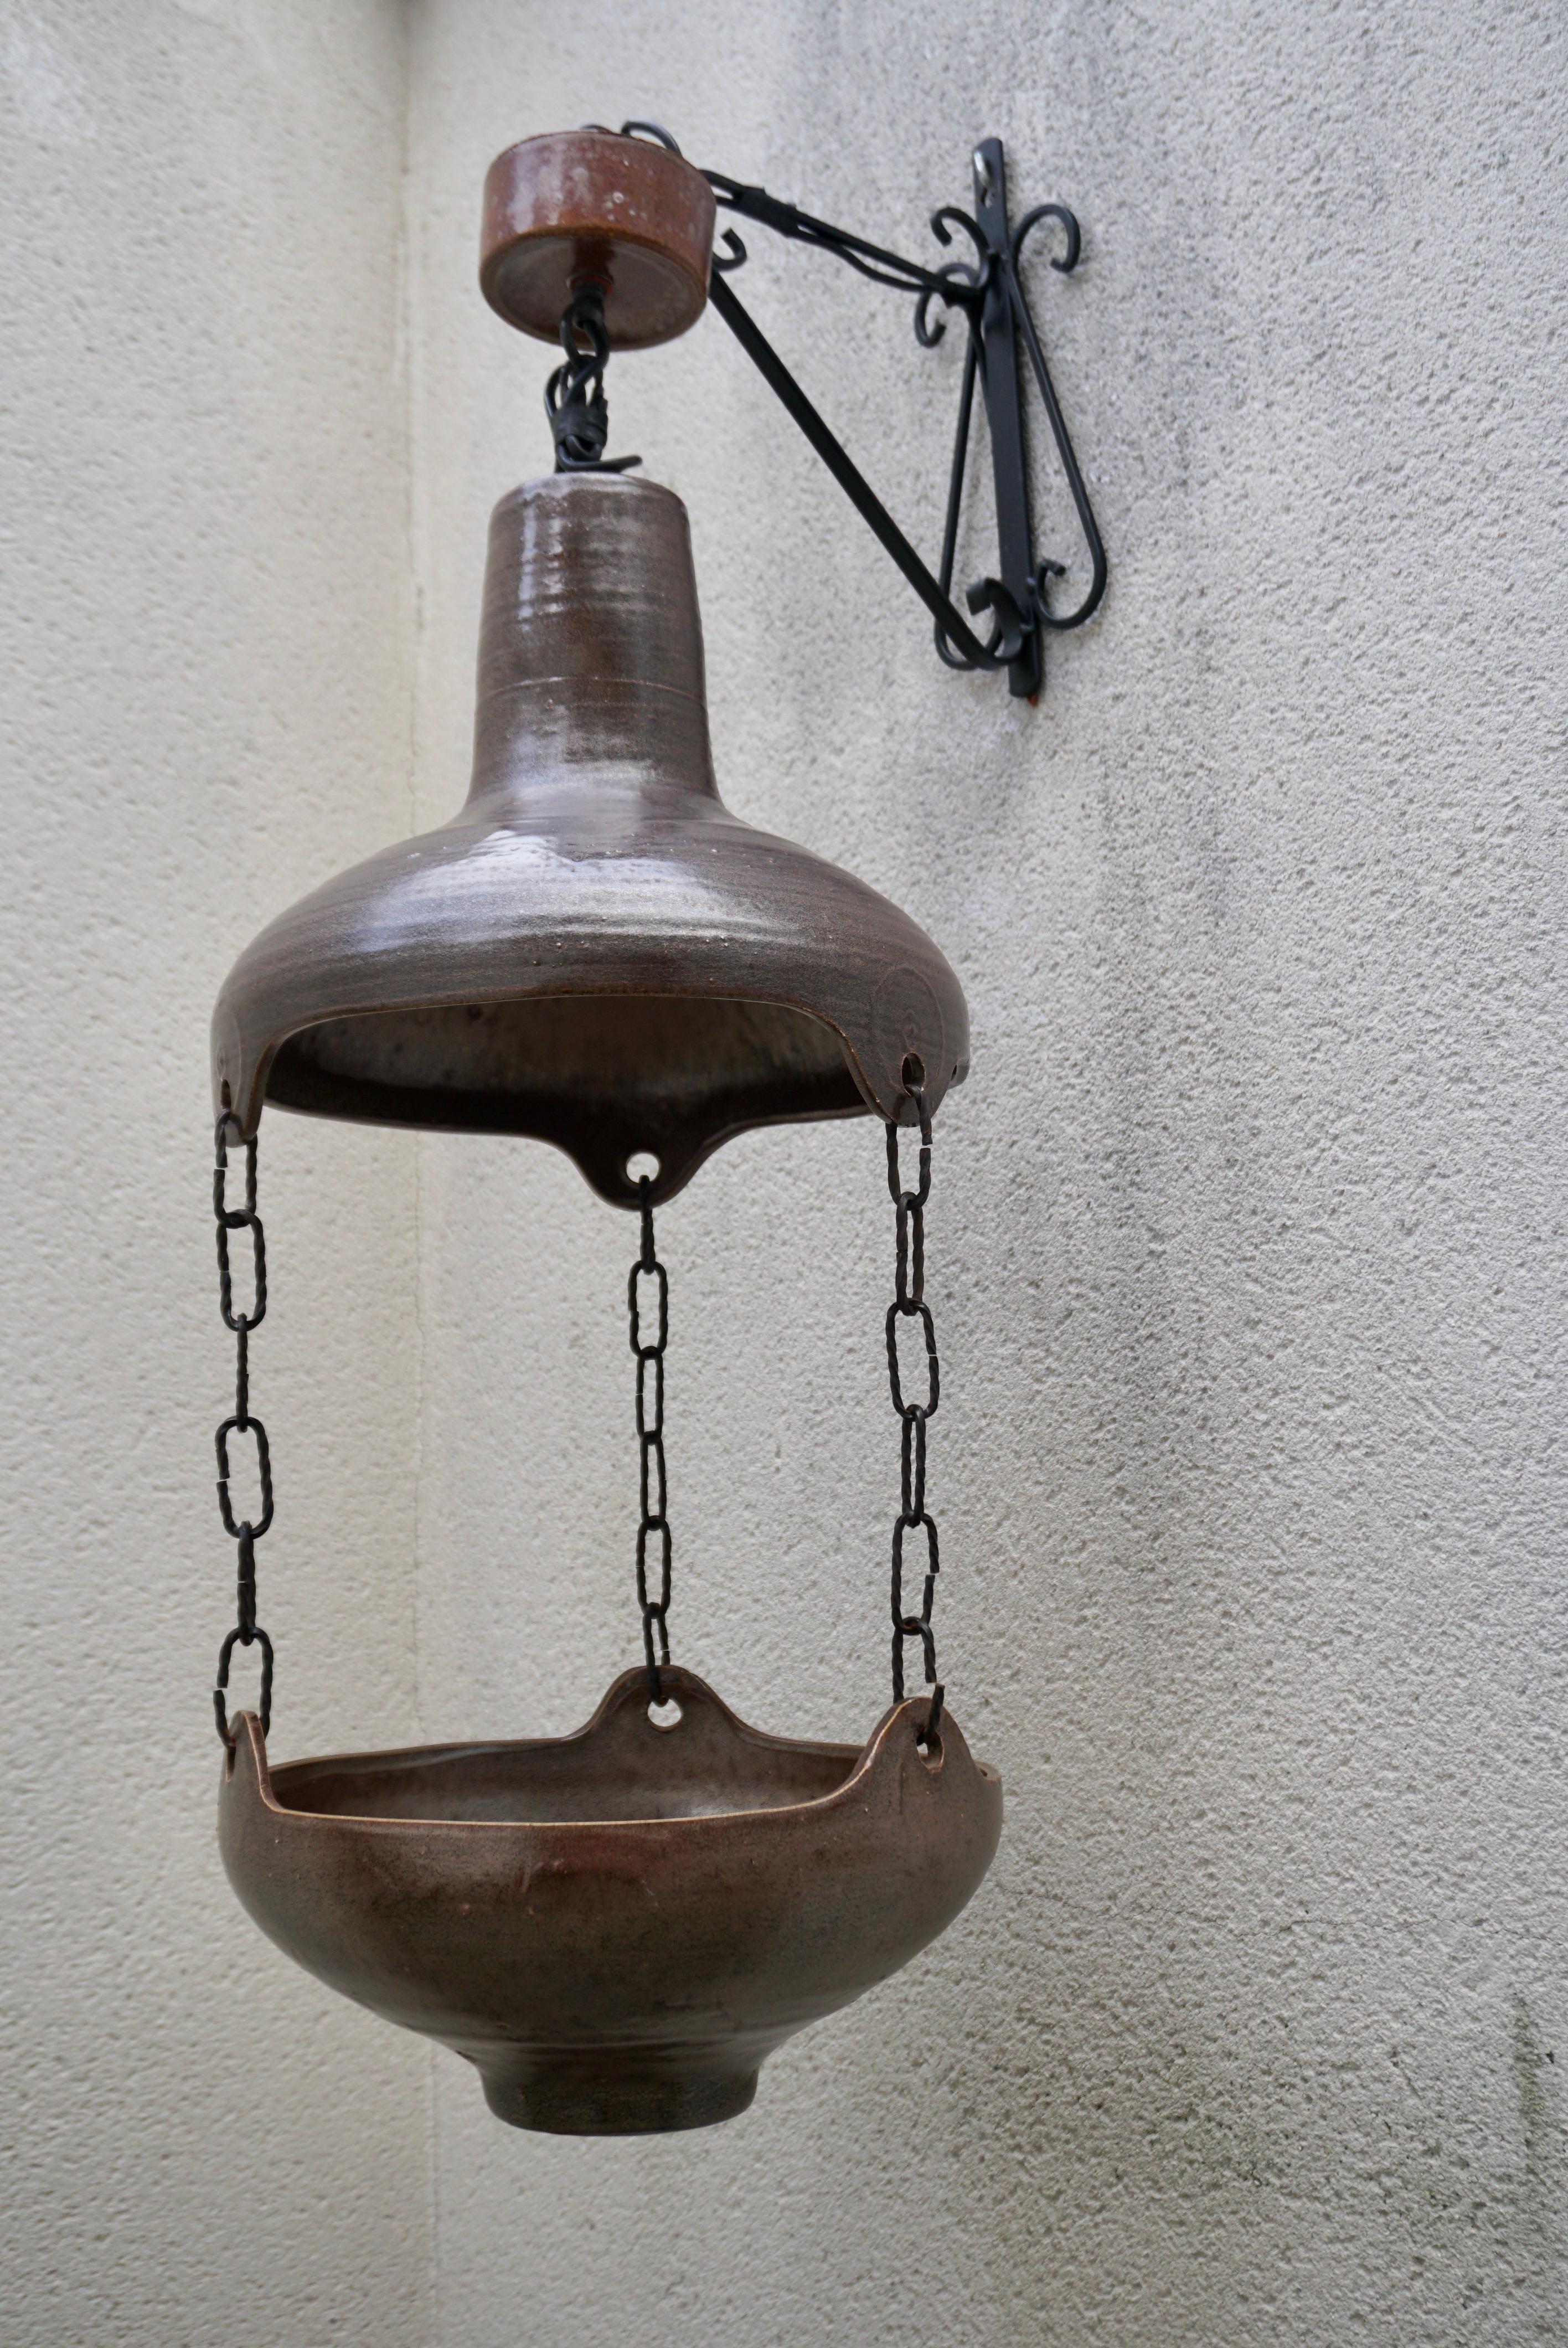 Vintage ceramic ceiling light or wall light for Plants.This is originally a ceiling lamp, but it was later turned into a wall lamp.
The total height including the hanging system is 36